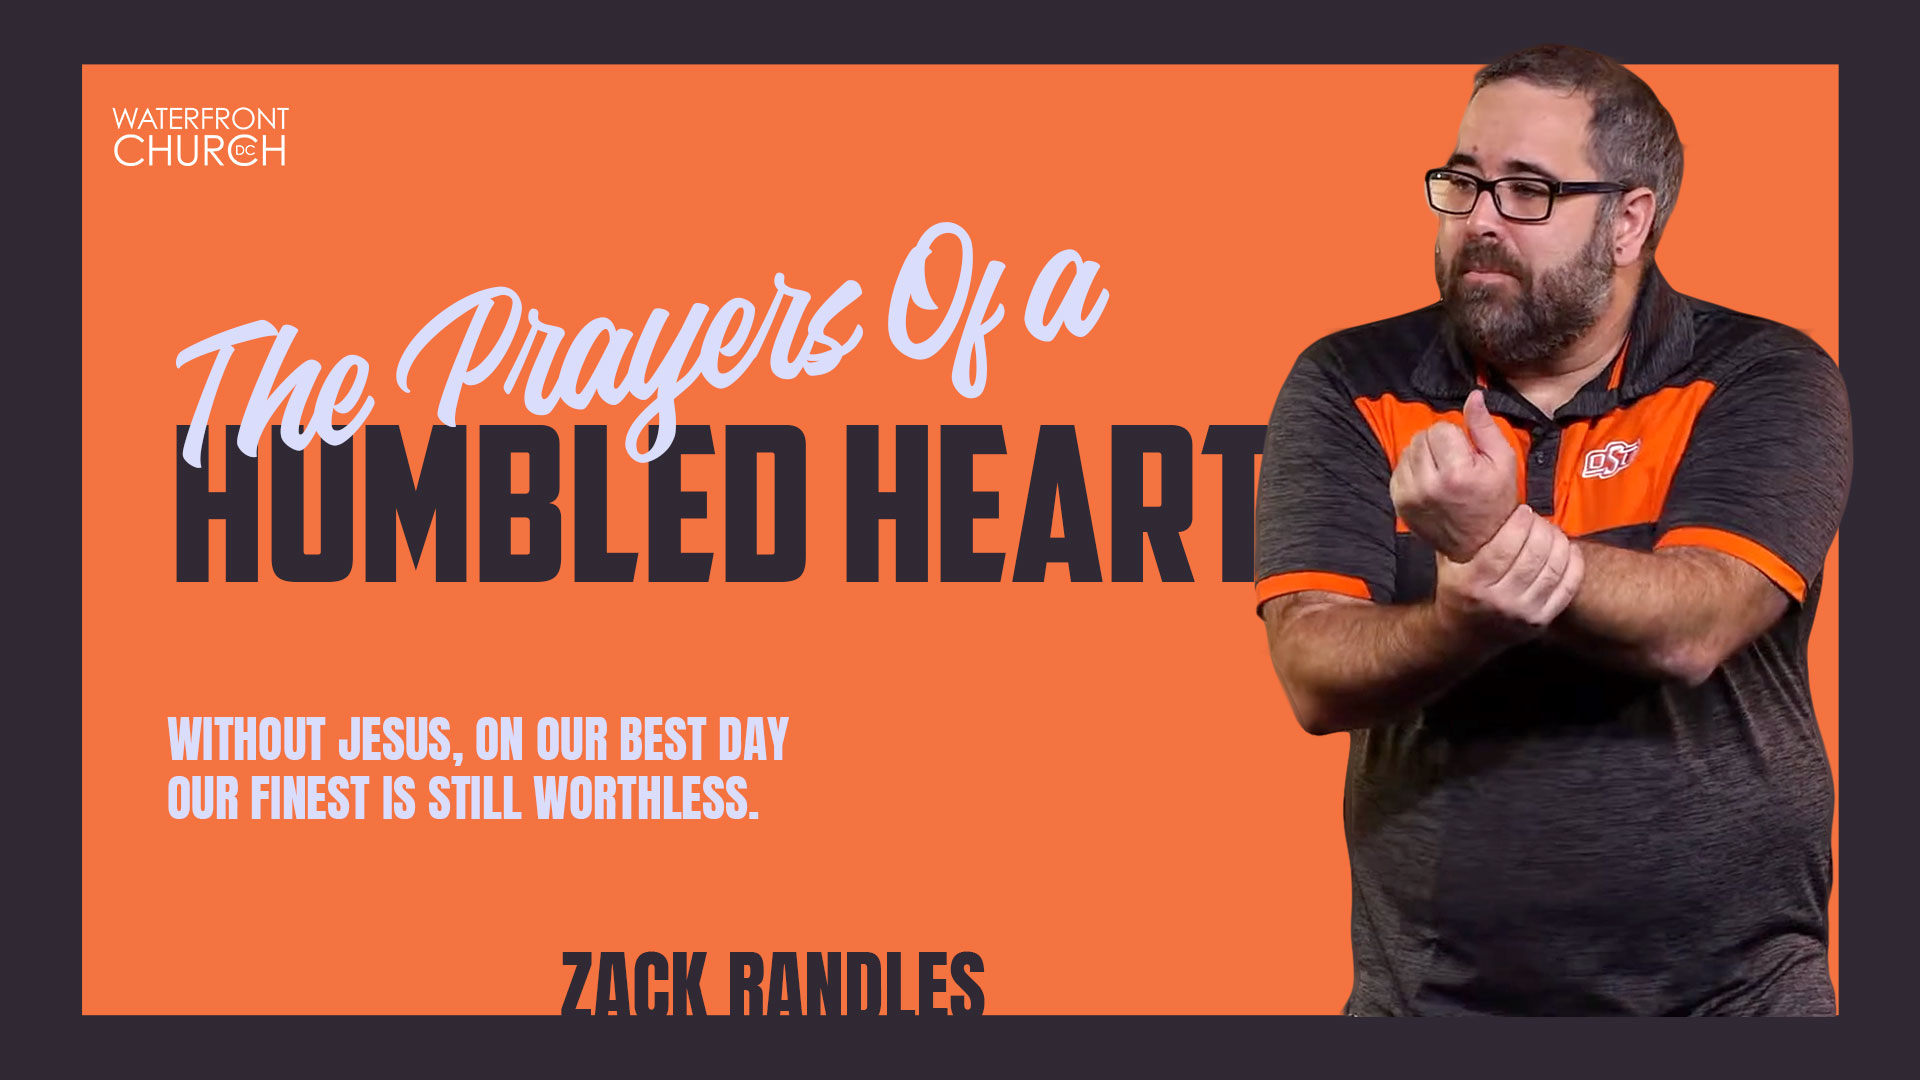 The-Prayers-of-a-Humbled-Heart-zack-randles